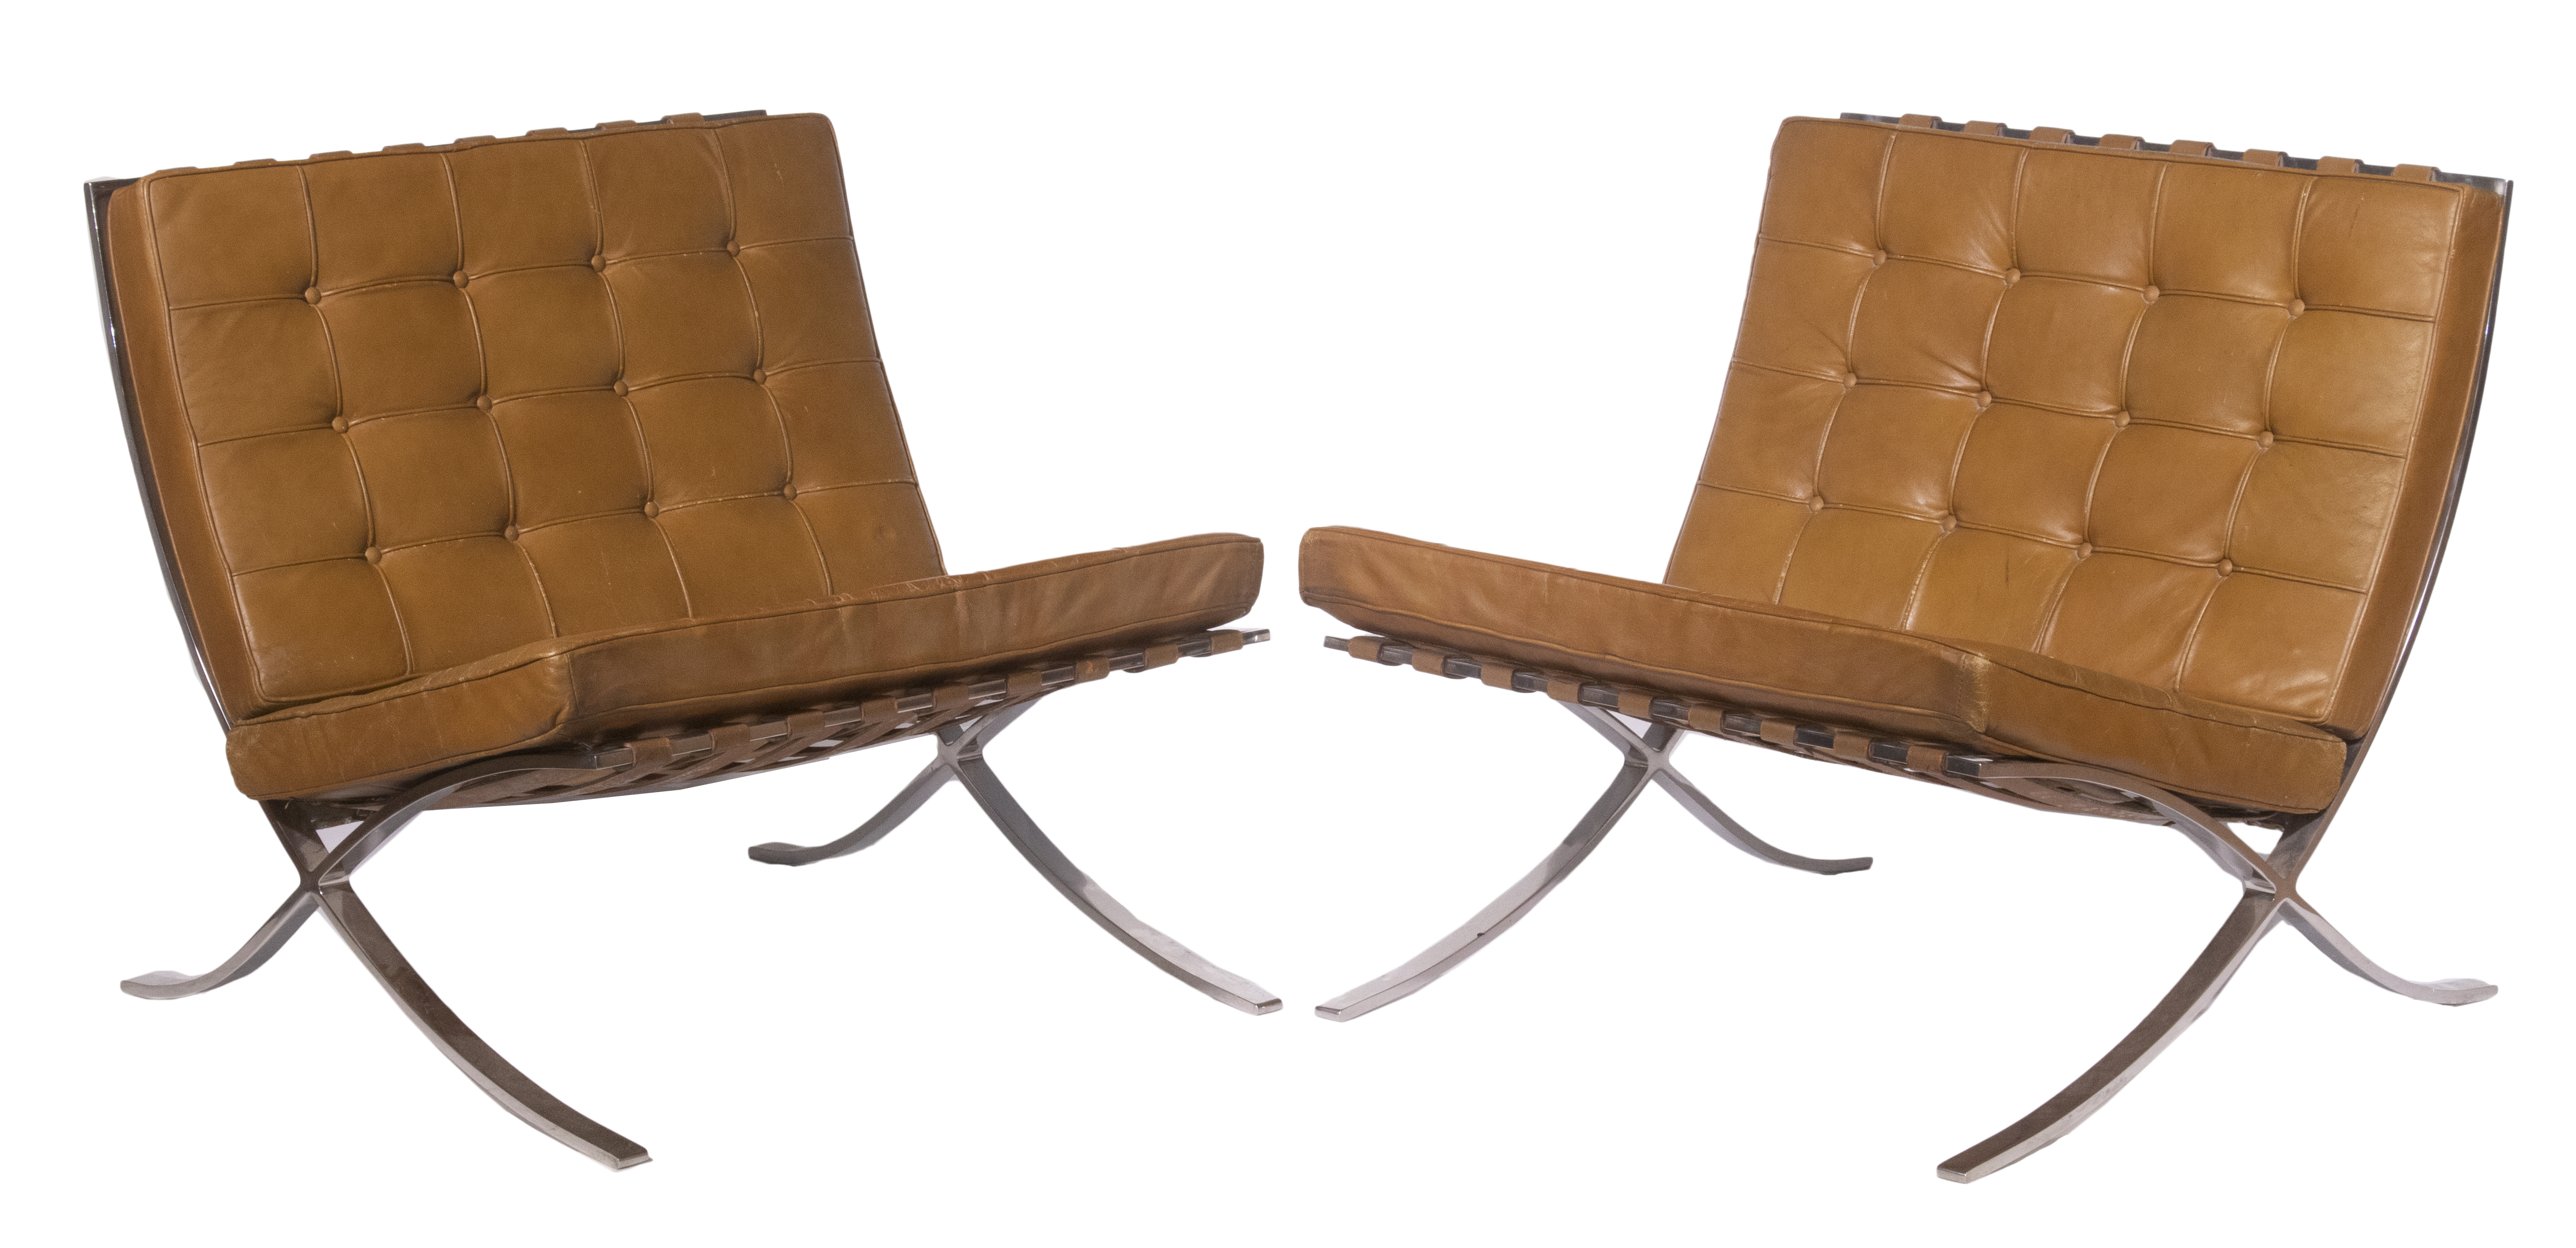 Pair of vintage leather Barcelona chairs by Mies Van Der Rohe for Knoll, est. $2,000-$3,000